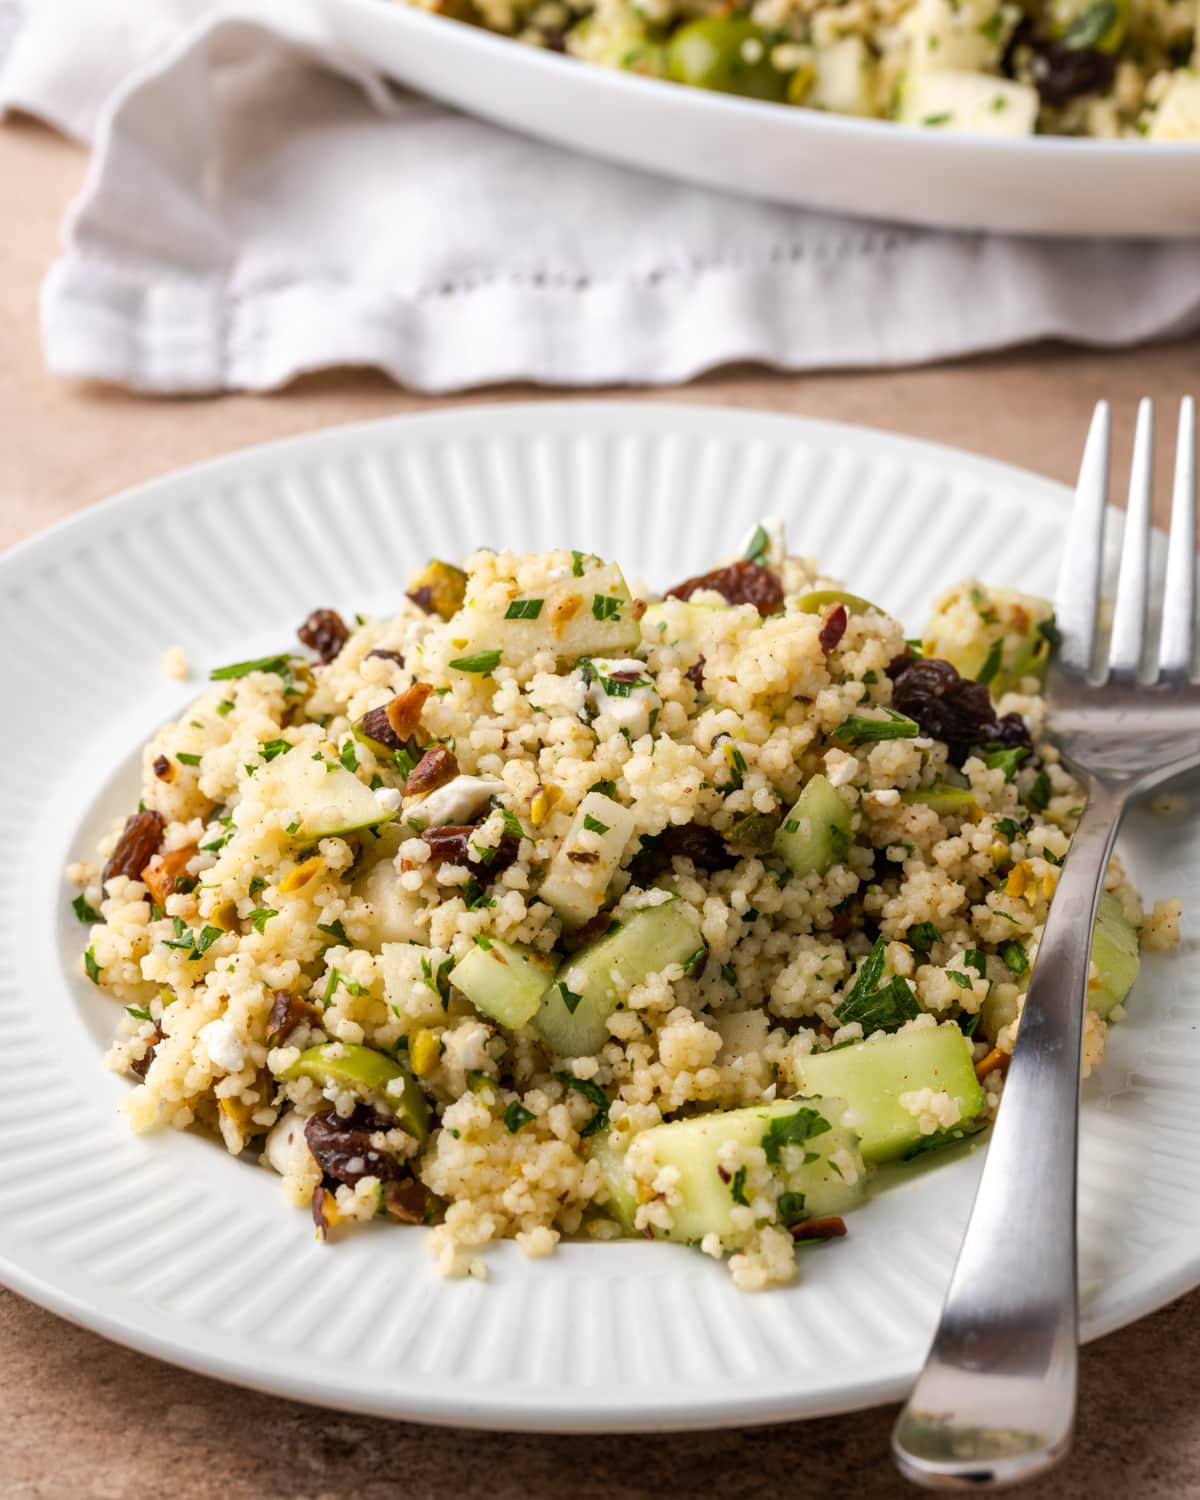 A serving of Mediterranean couscous salad on a white plate with a fork.